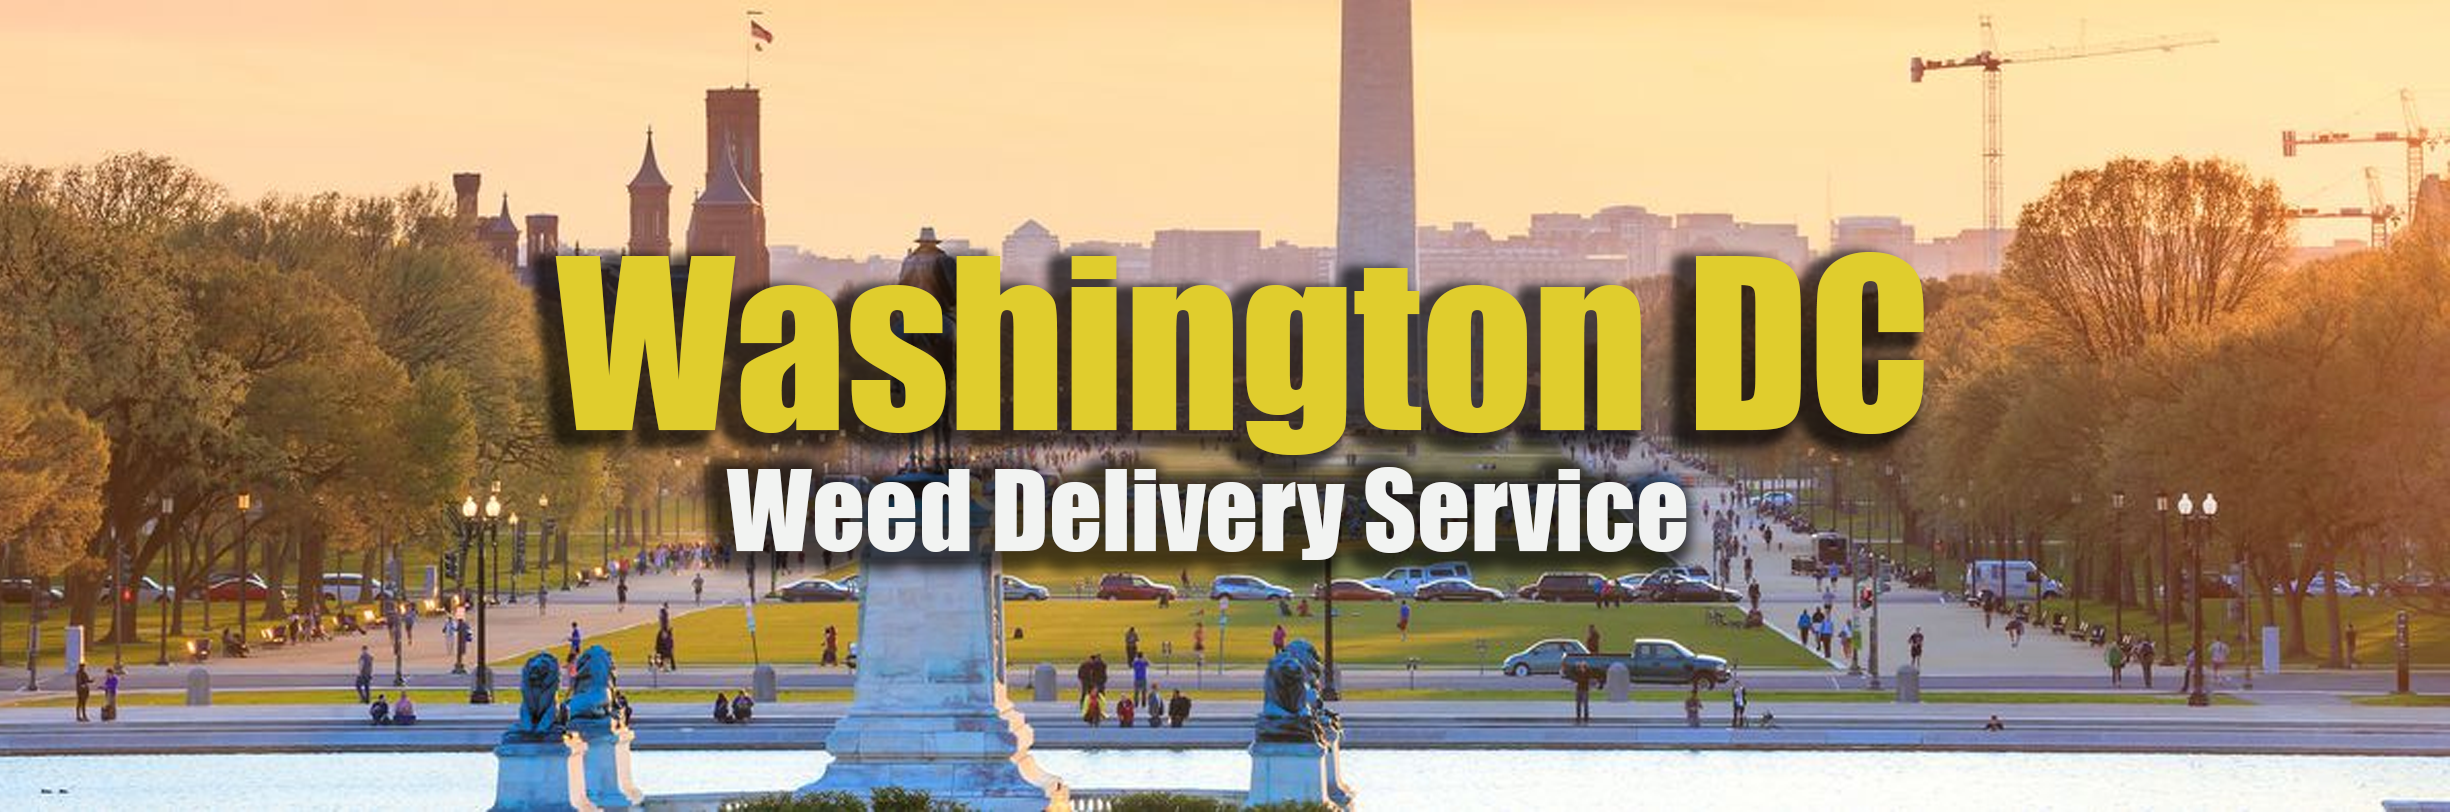 Washington DC weed delivery